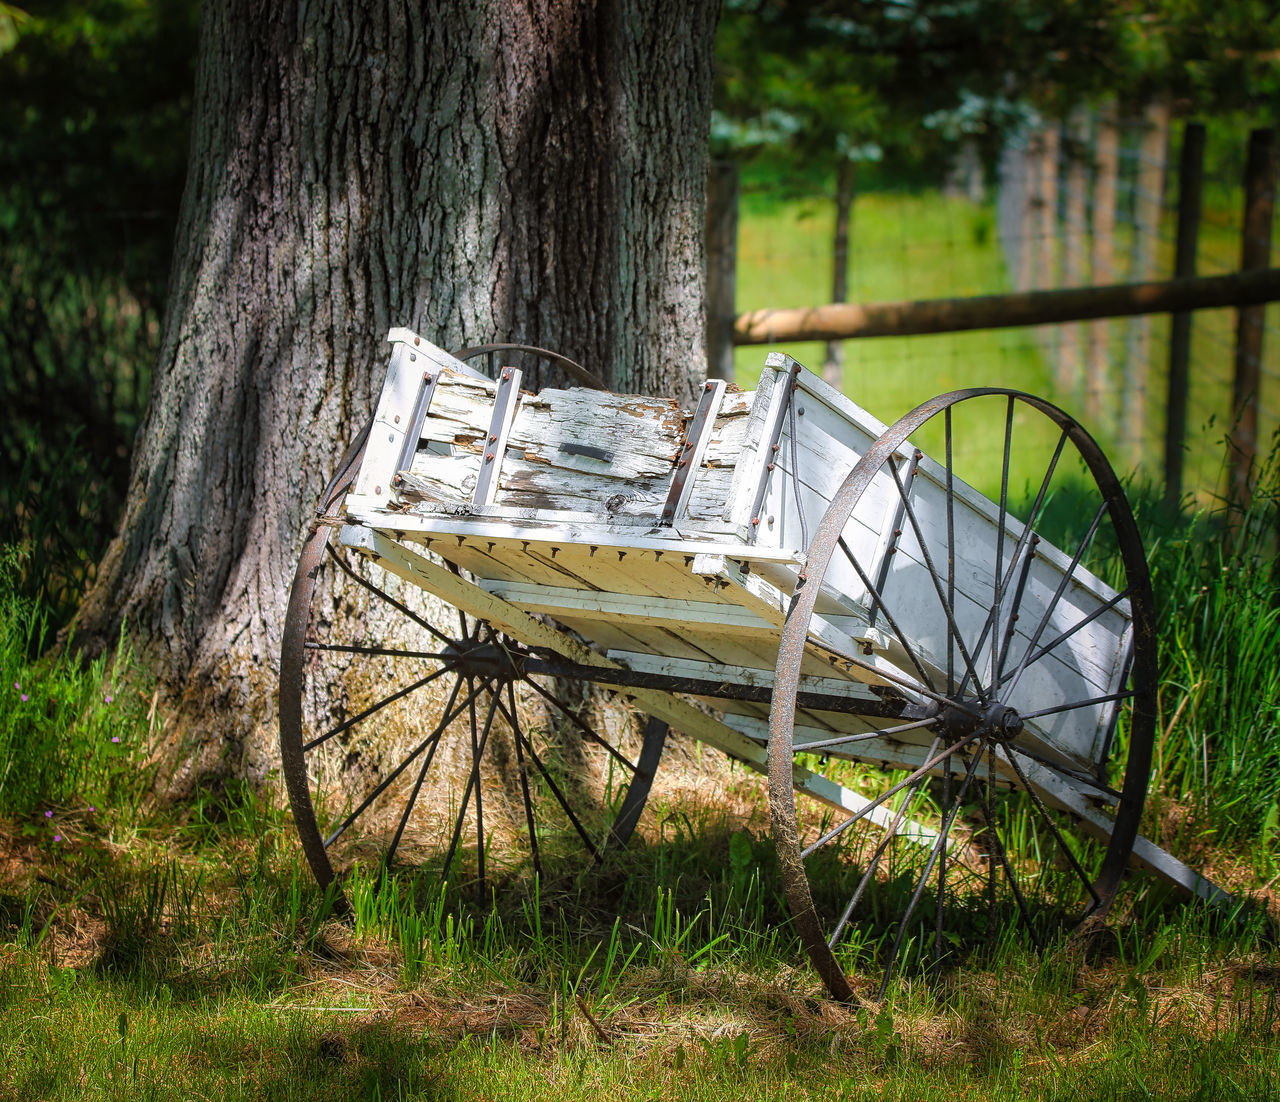 plant, tree, nature, grass, no people, tree trunk, wood, trunk, land, day, vehicle, abandoned, cart, transportation, field, rural area, outdoors, growth, wheel, old, mode of transportation, tranquility, green, absence, seat, damaged, woodland